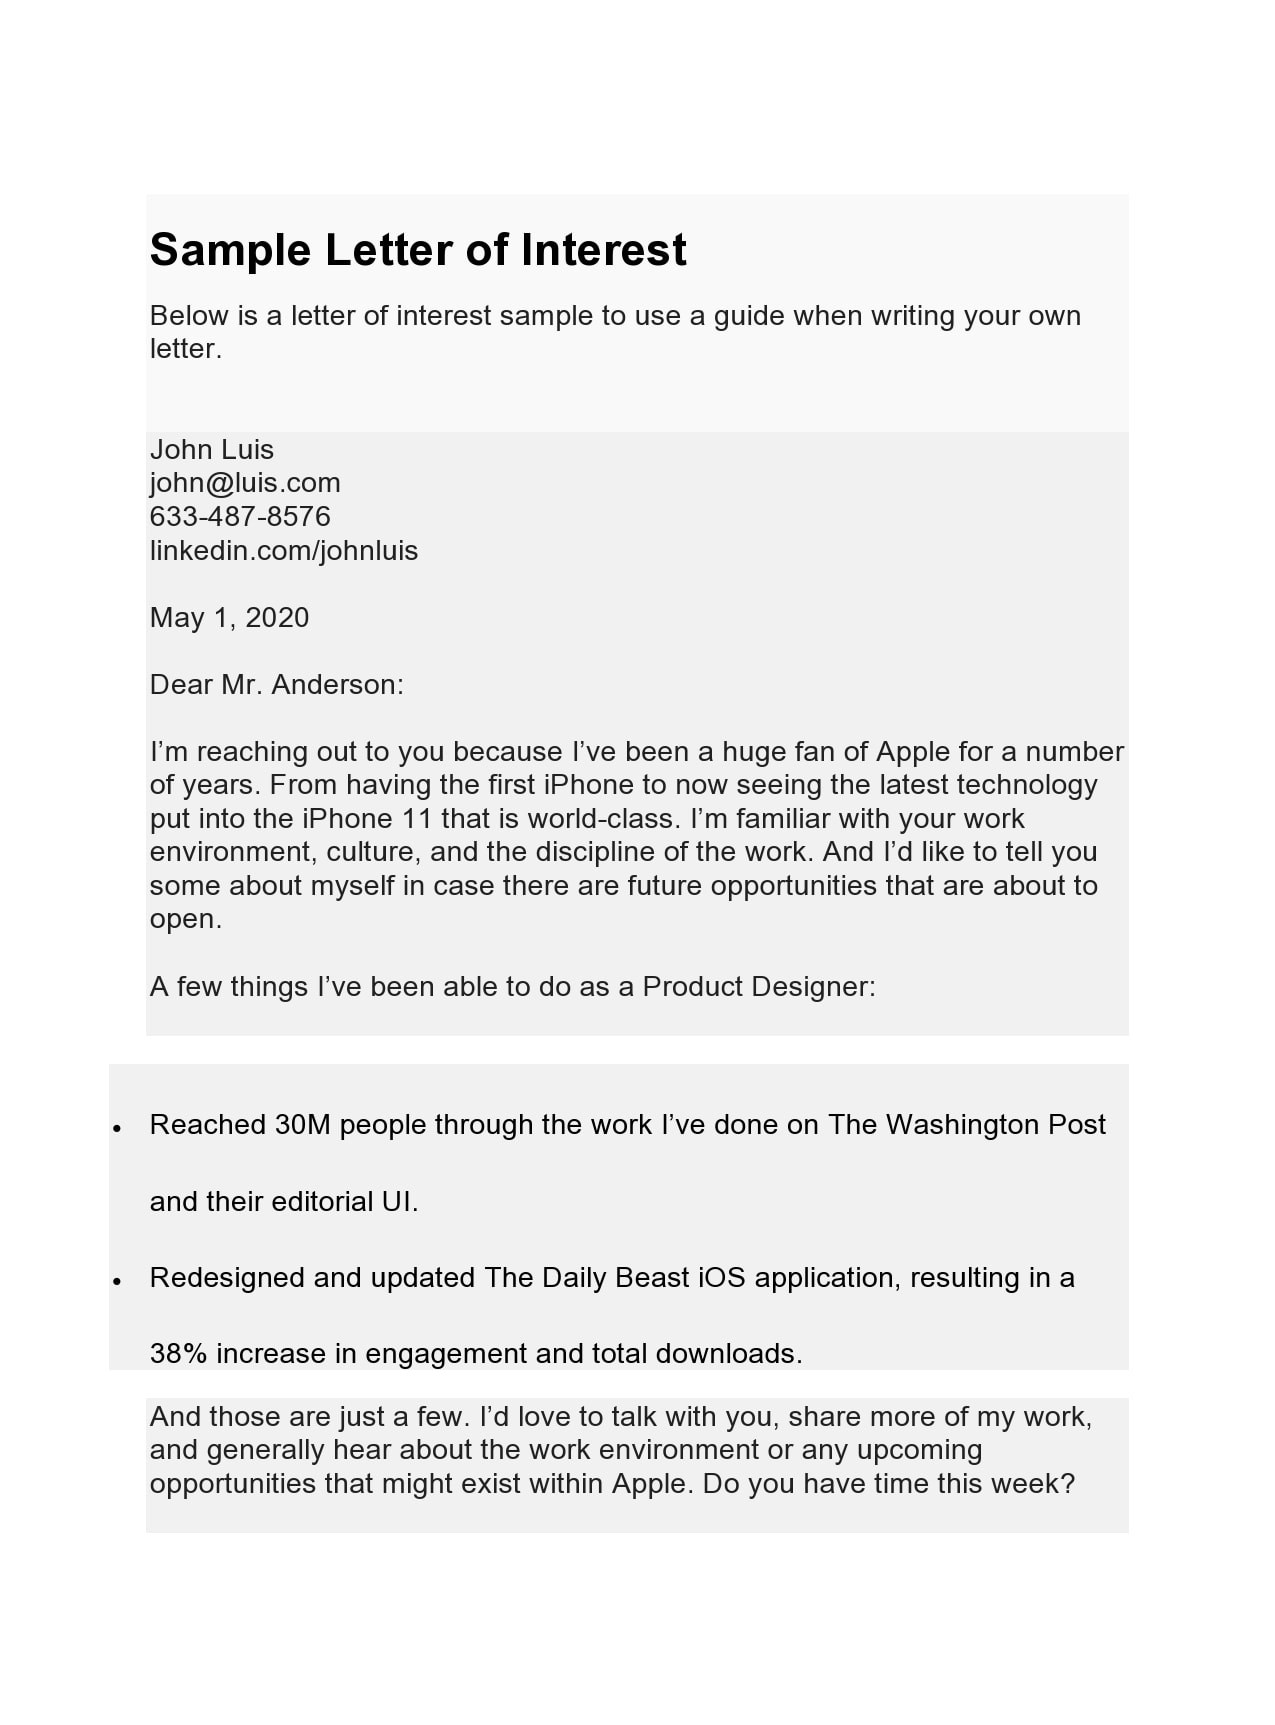 30 Editable Letter of Interest for a Job Templates - TemplateArchive